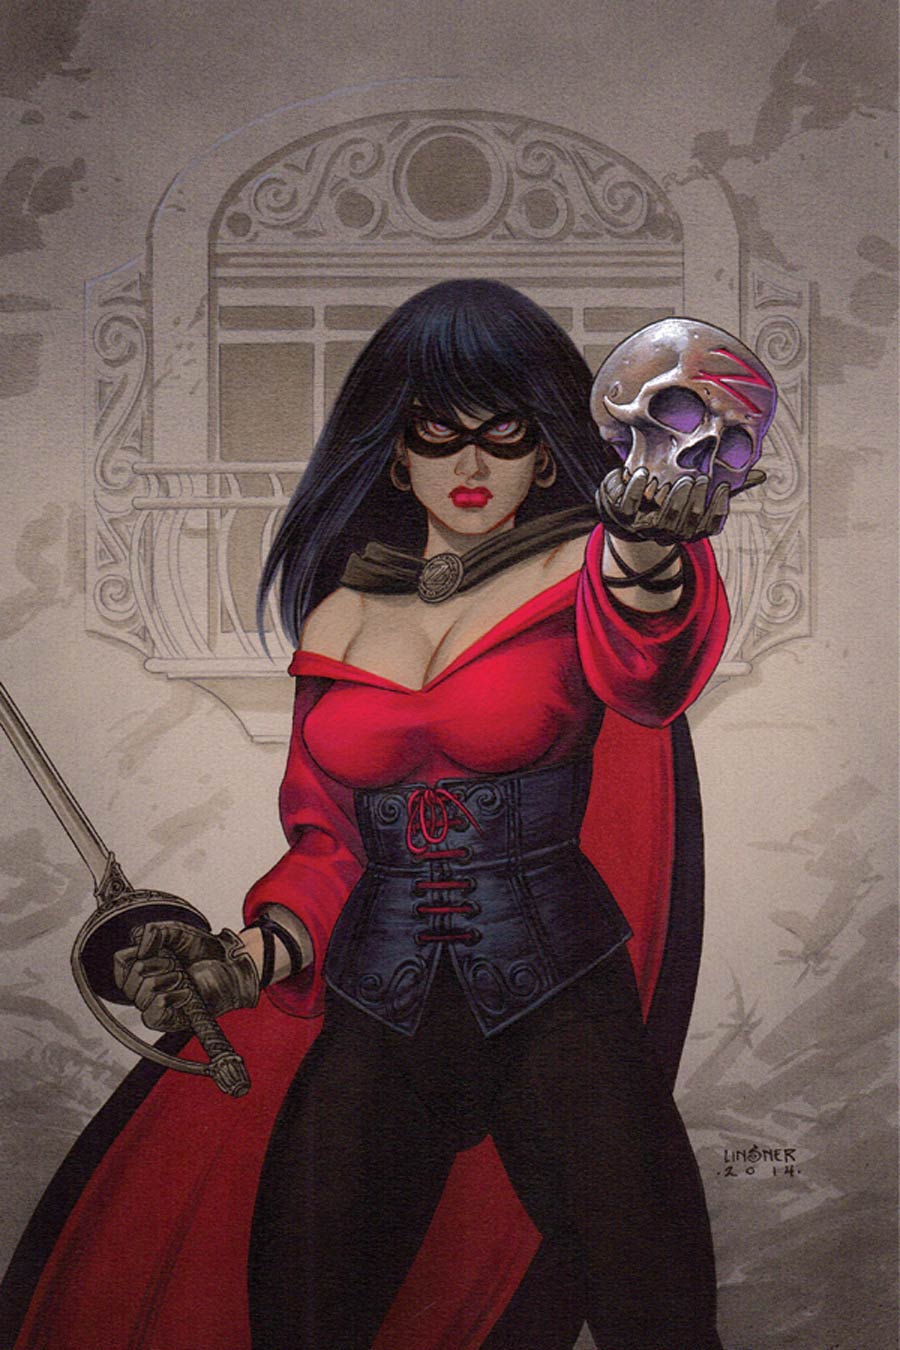 Lady Zorro #3 Cover C High-End Joseph Michael Linsner Virgin Art Ultra-Limited Variant Cover (ONLY 50 COPIES IN EXISTENCE!)